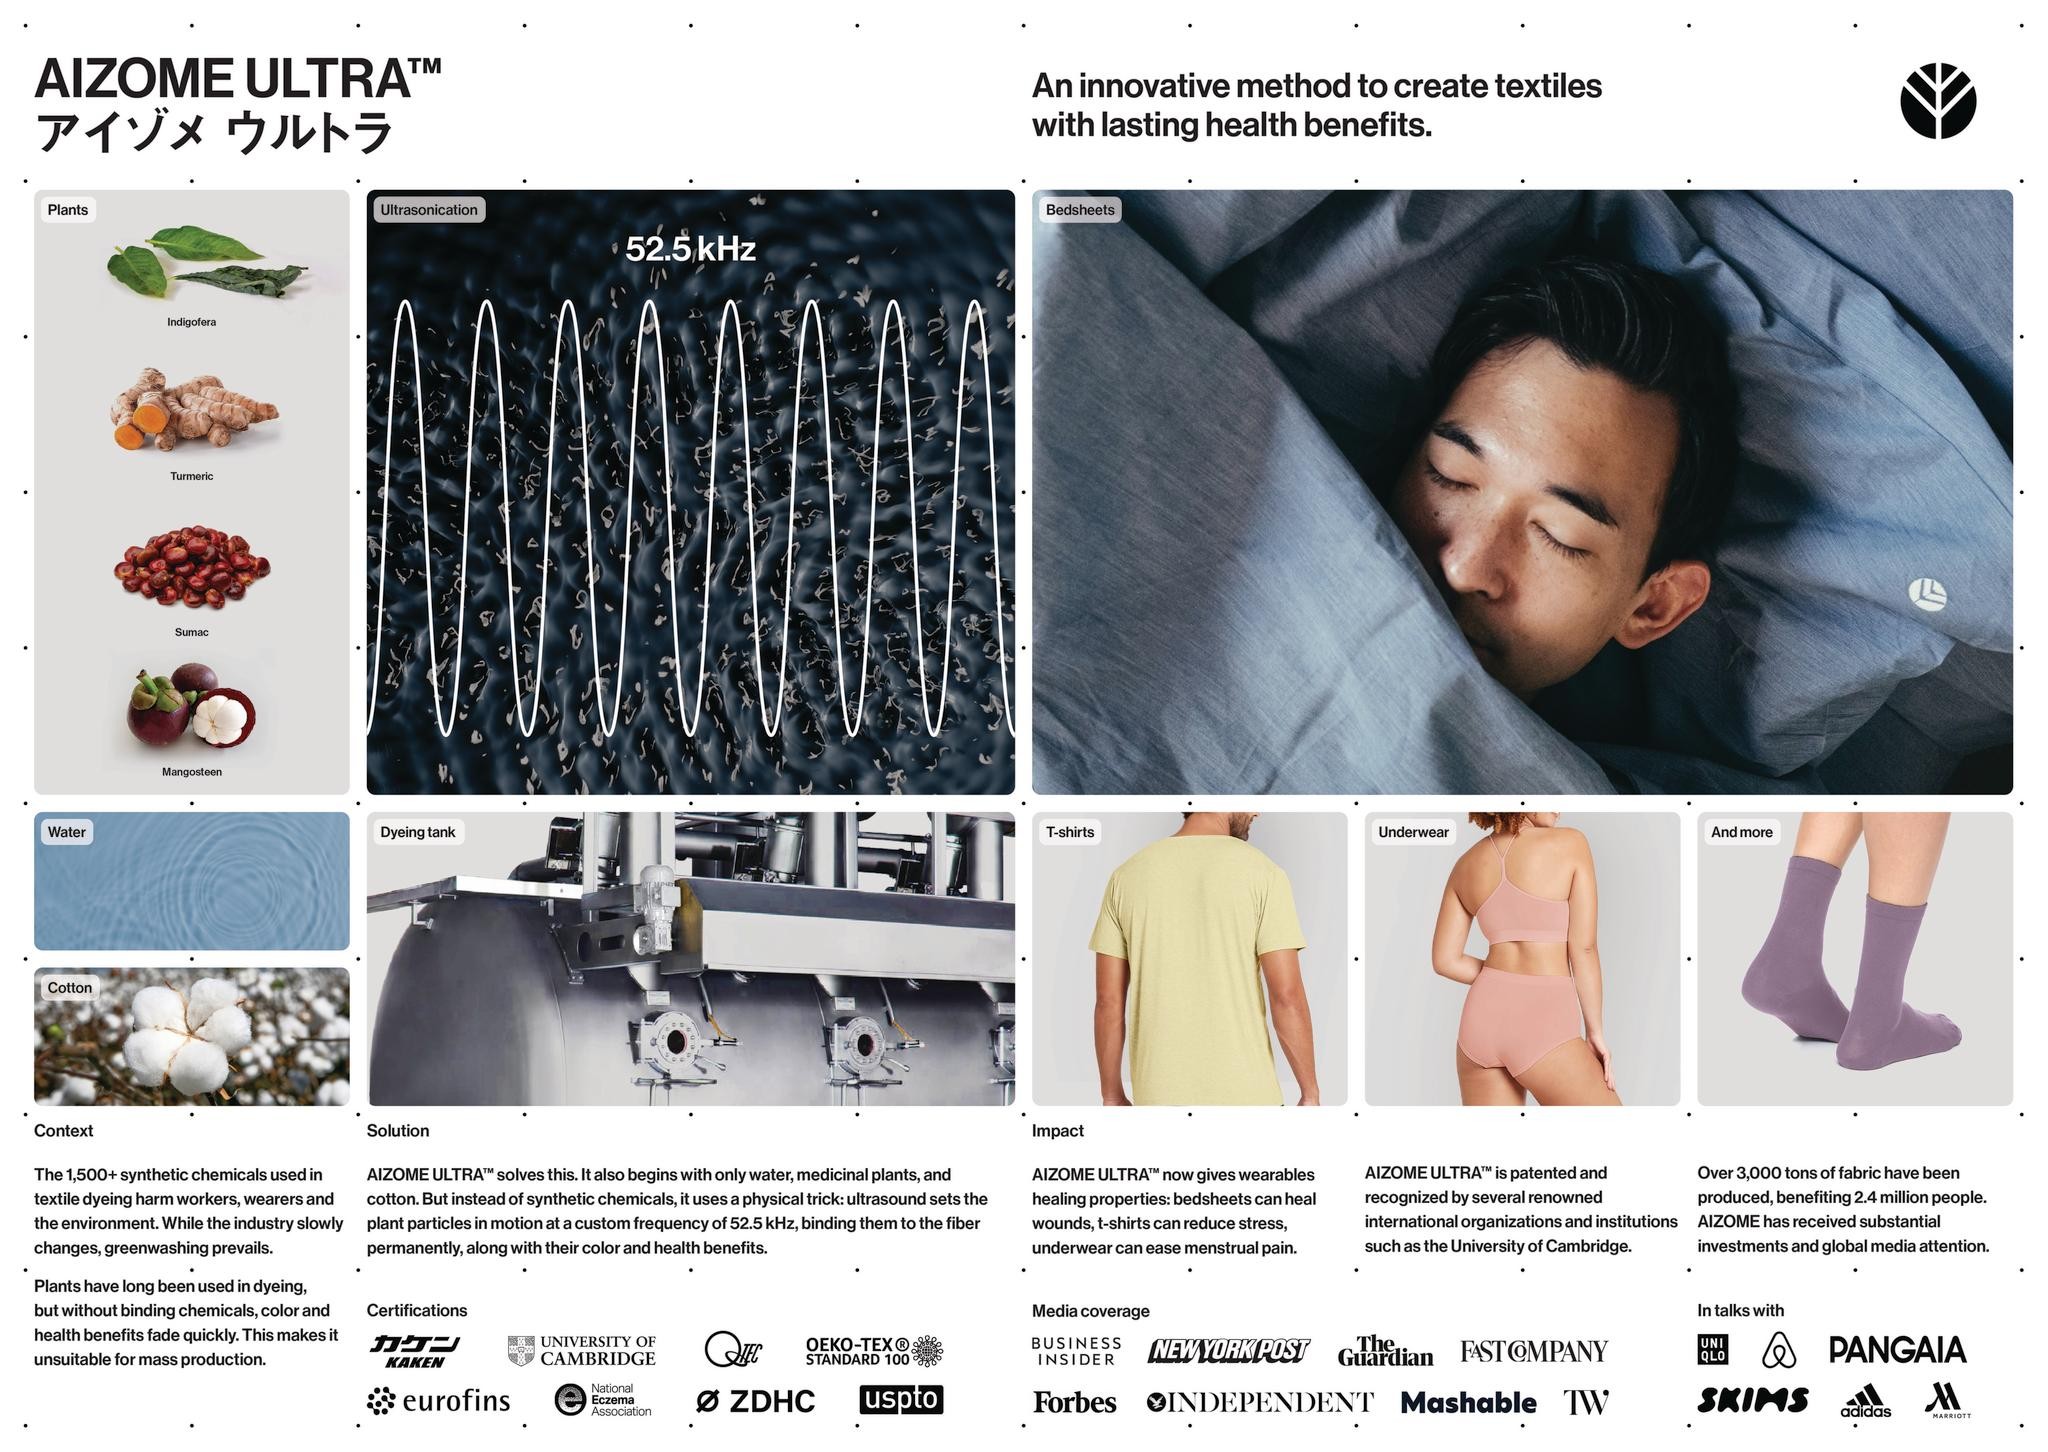 AIZOME ULTRA™ – AN INNOVATIVE METHOD TO CREATE TEXTILES WITH LASTING HEALTH BENEFITS.